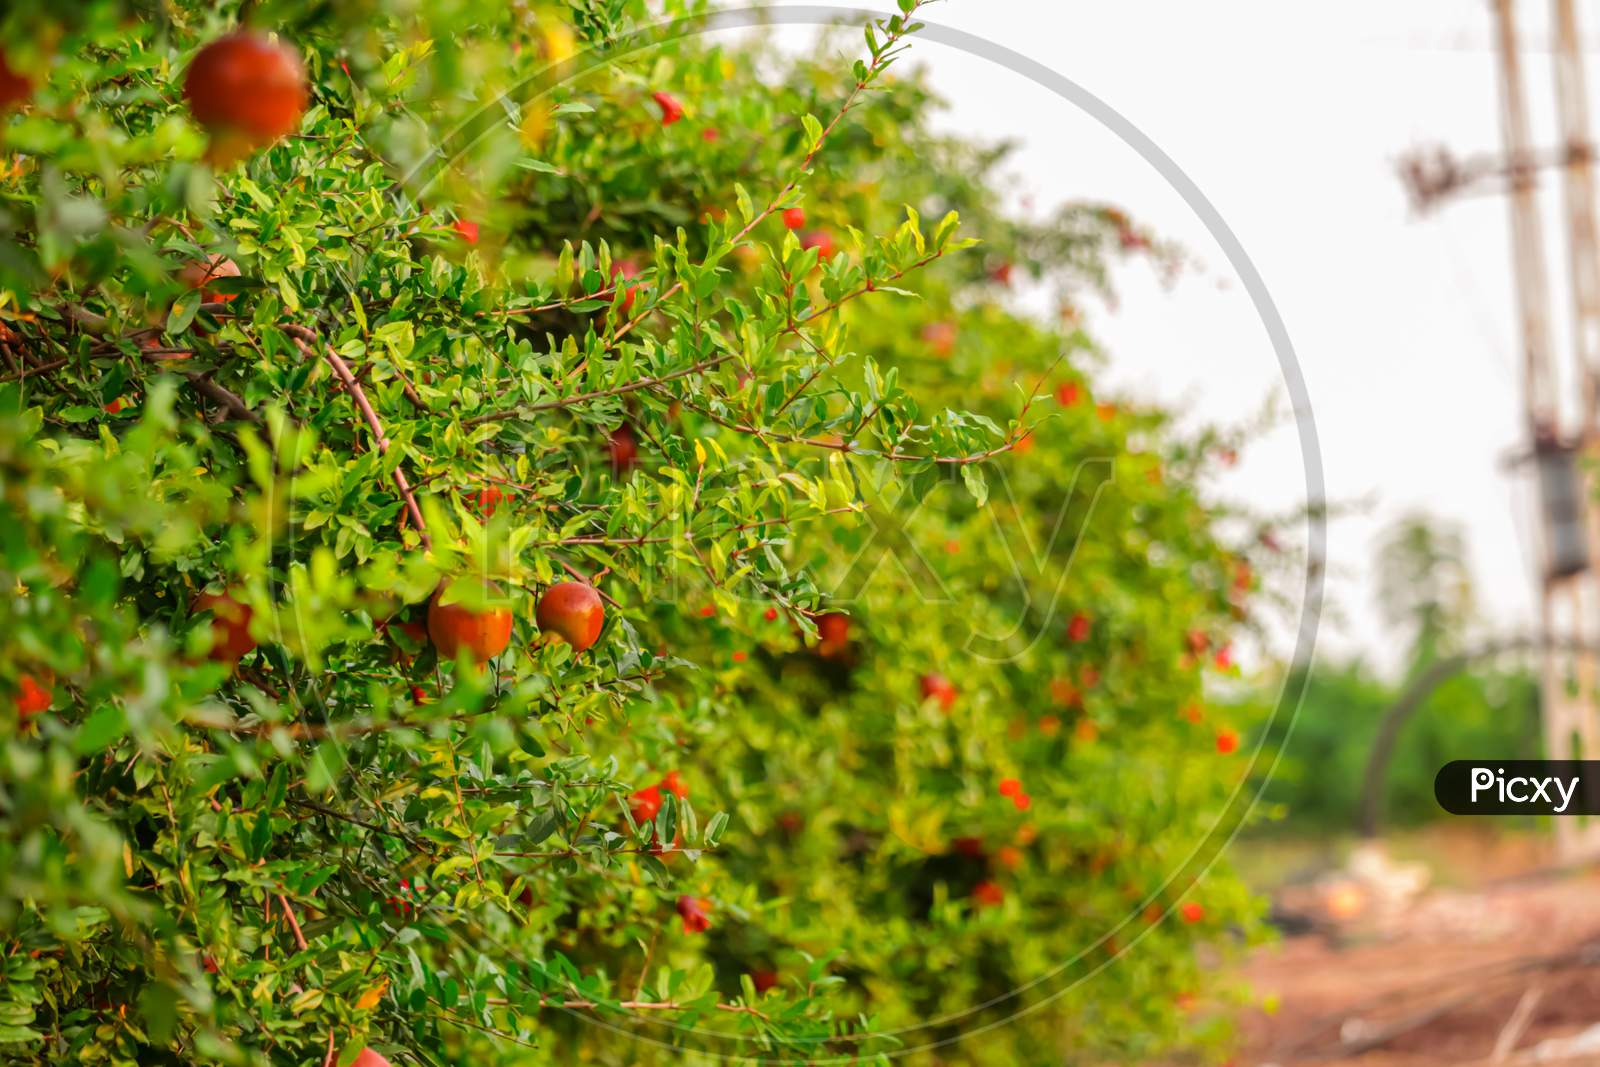 Pomegranate Crop Collected By Farmers,Huge Group Of Fresh Pomegranate Fruits On A Ripe Fruit Background, Selective Focus On Subject